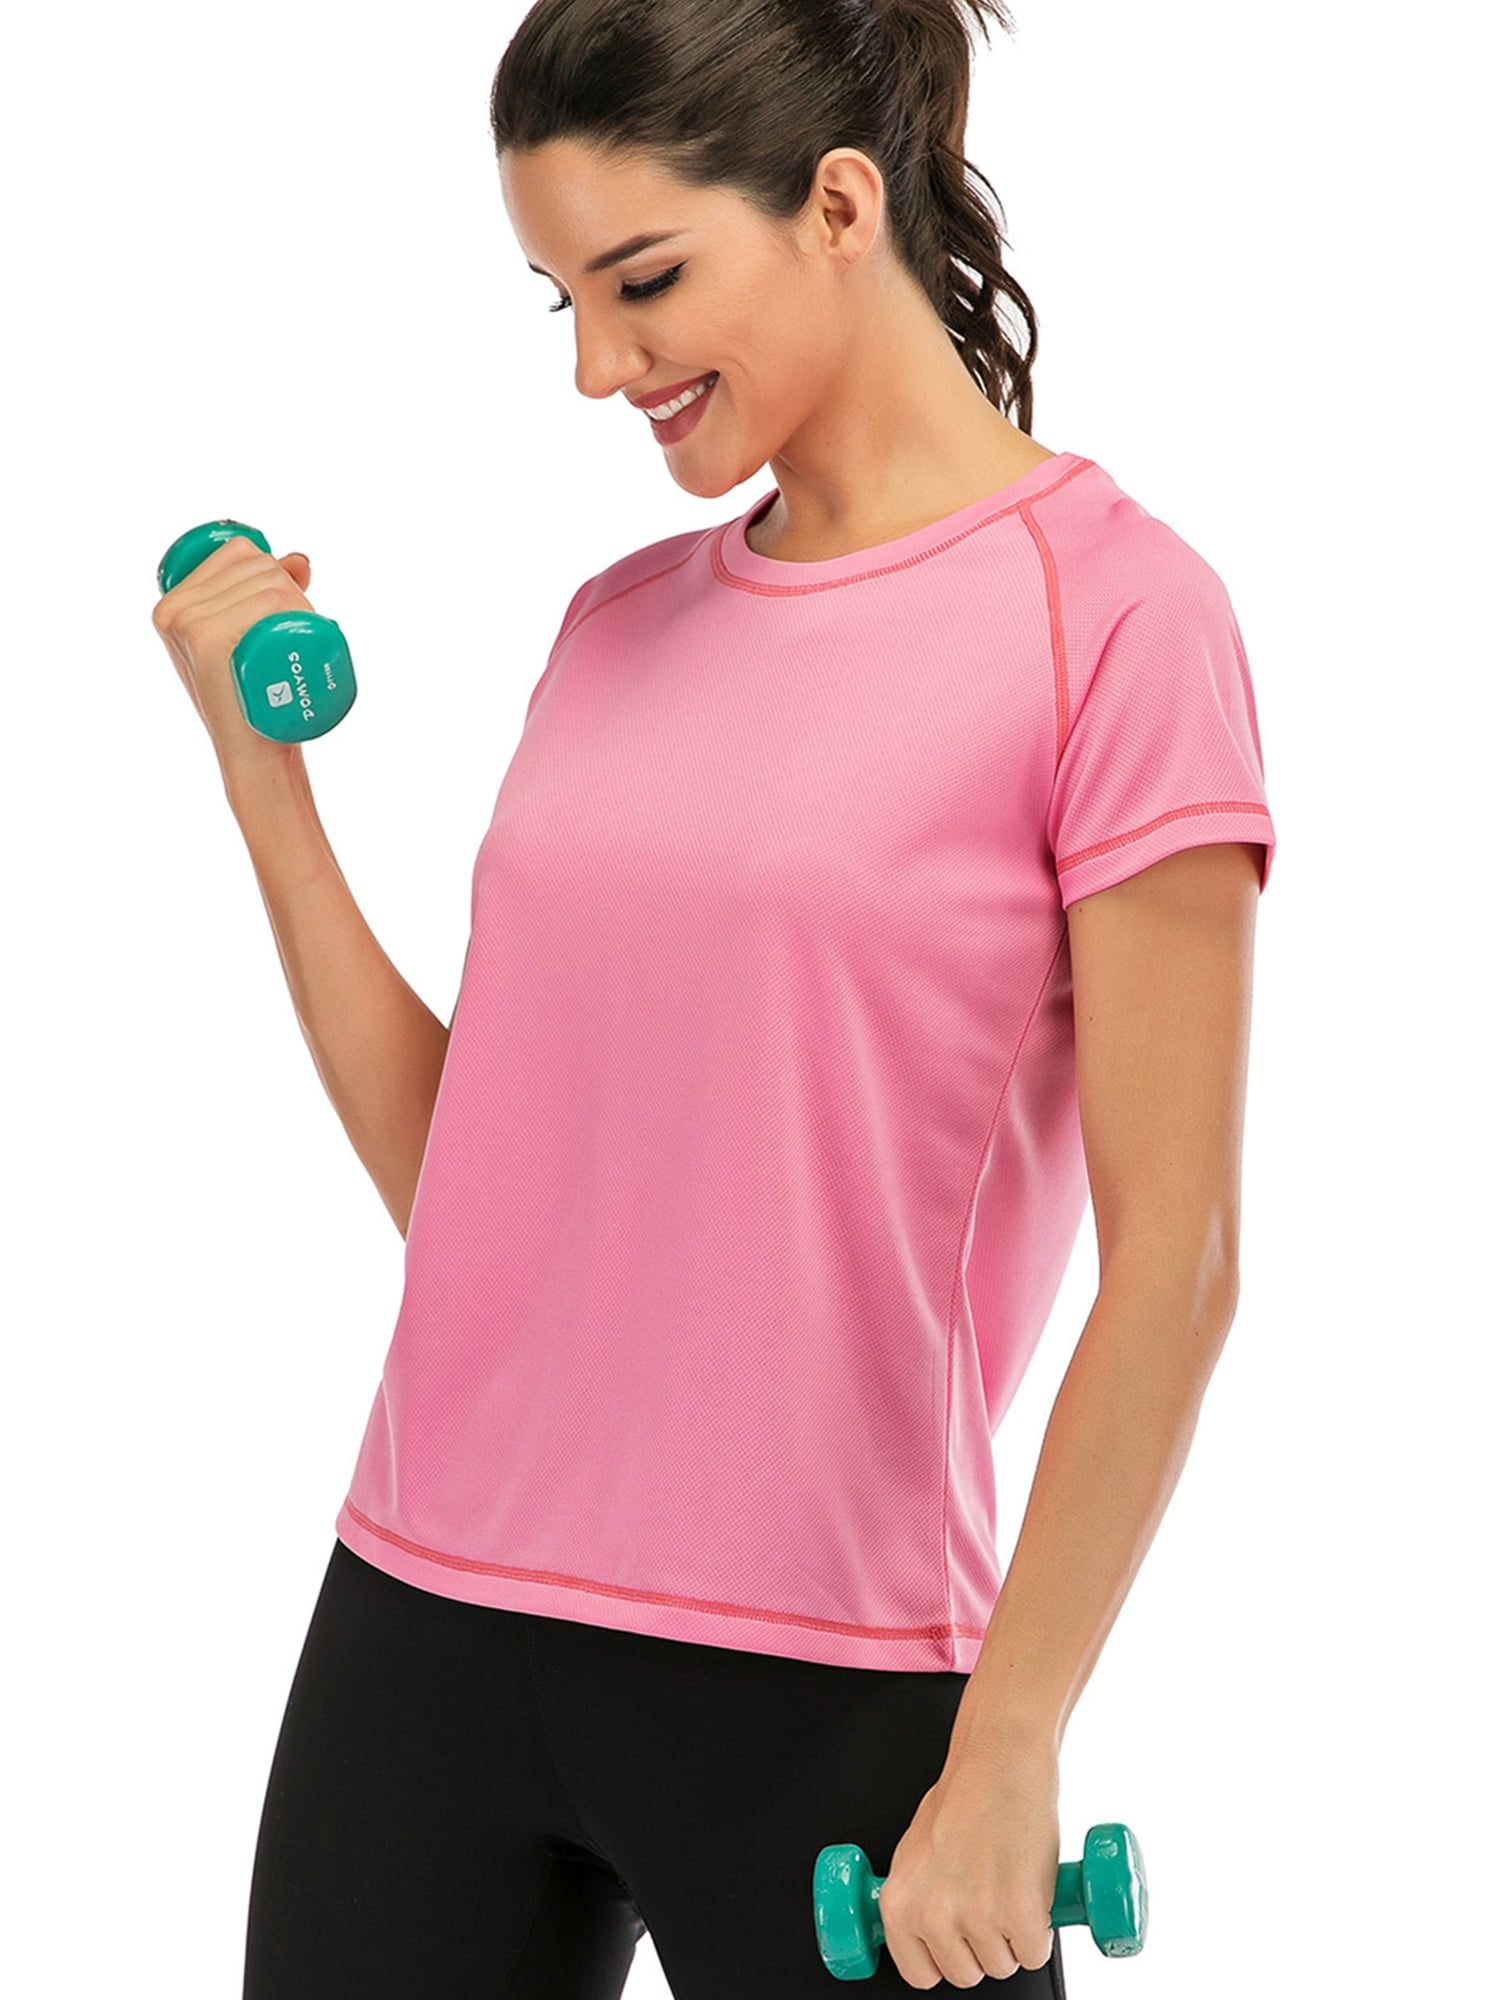 Women Quick Dry Workout T-Shirt Short Sleeve Yoga Top Moisture Wicking  Athletic Shirts Fitness Workout Activewear Tennis Tops,Pink S-3XL